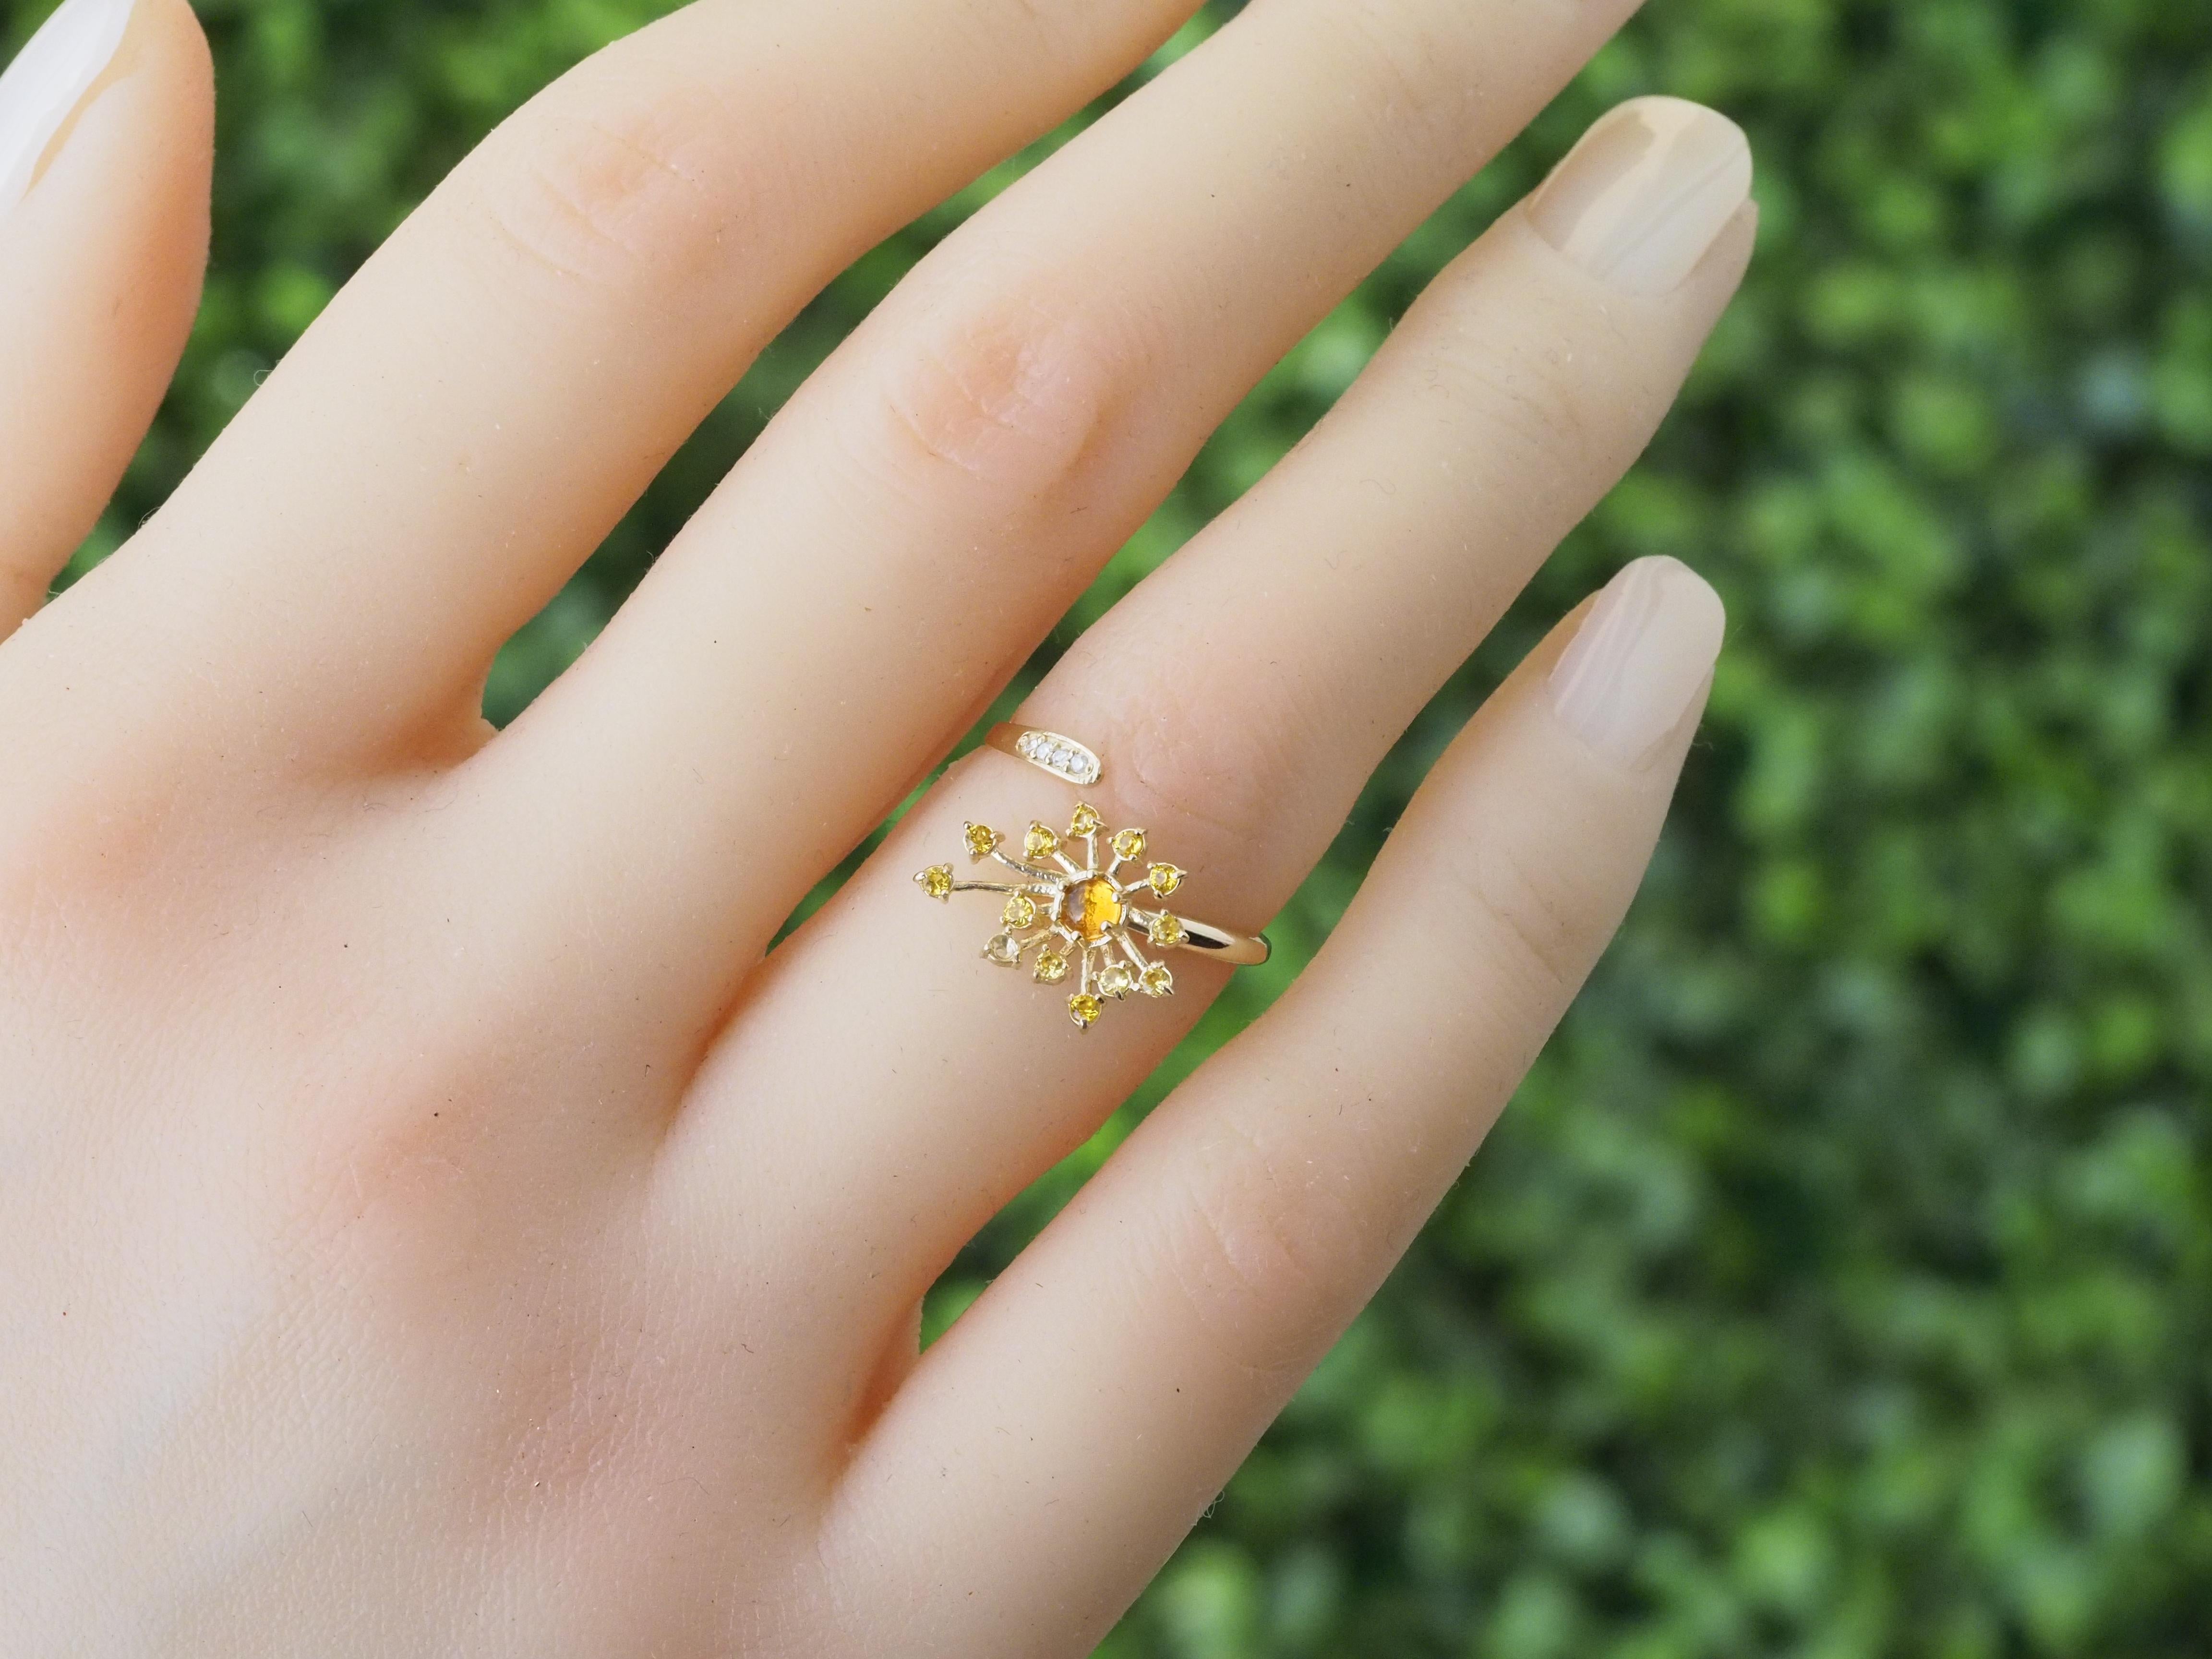 Dandelion Flower set: ring and earrings with yellow sapphires and diamonds

Earrings: 
Metal: 14 karat gold
Weight: 1.45 g.
Size: 15 x 12.4 mm.
Central stones: Genuine sapphires
Cut: Round cabochon
Weight: approx 0.60 ct.
Color: Yellow
Clarity: